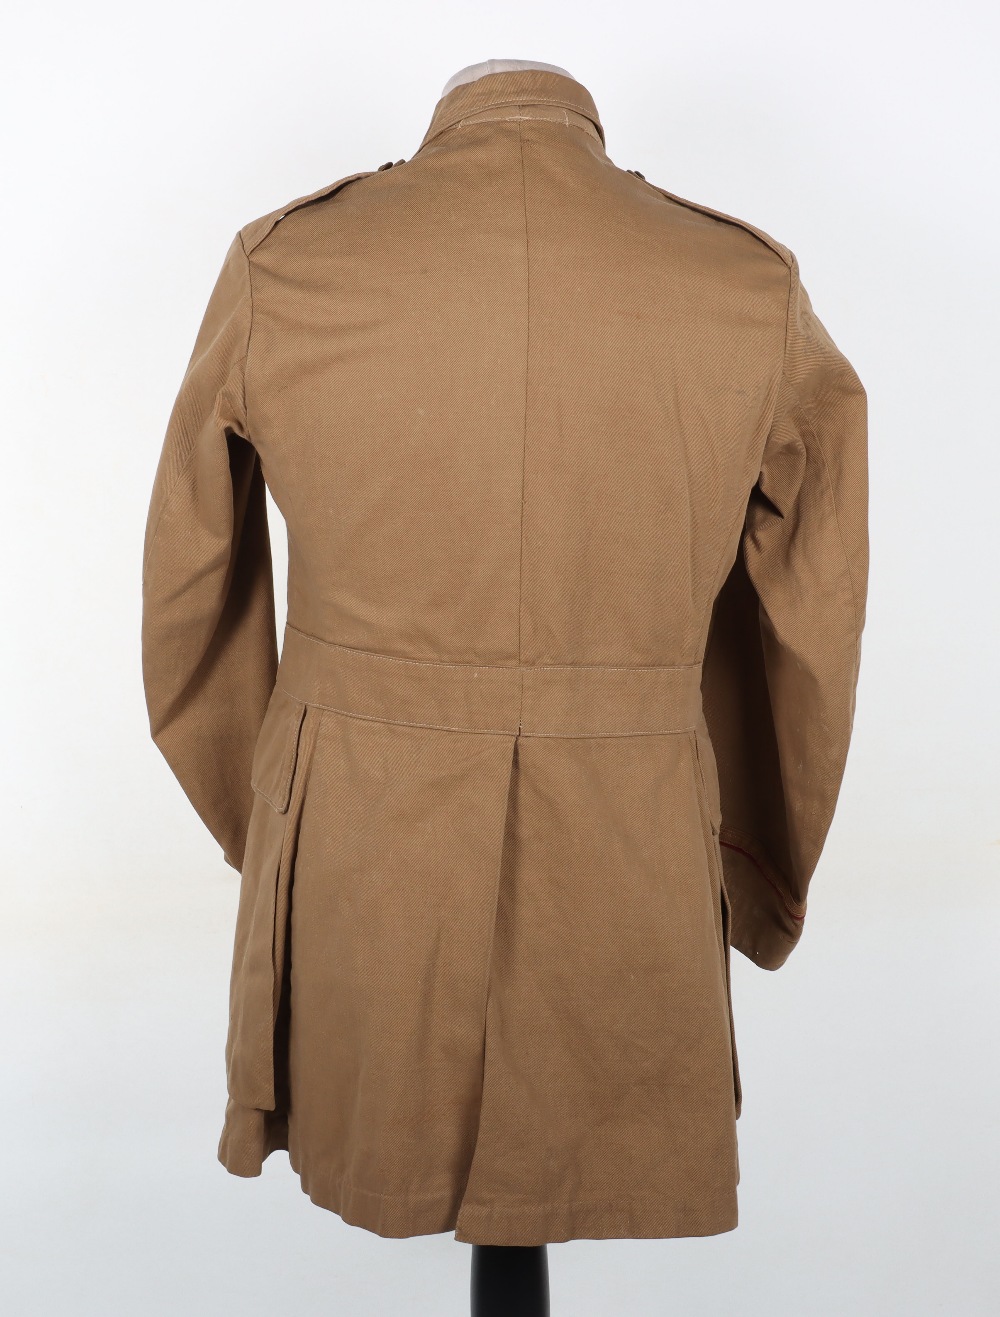 WW1 Royal Naval Volunteer Reserve / Royal Naval Division Doctors Tropical Pattern Tunic - Image 8 of 9